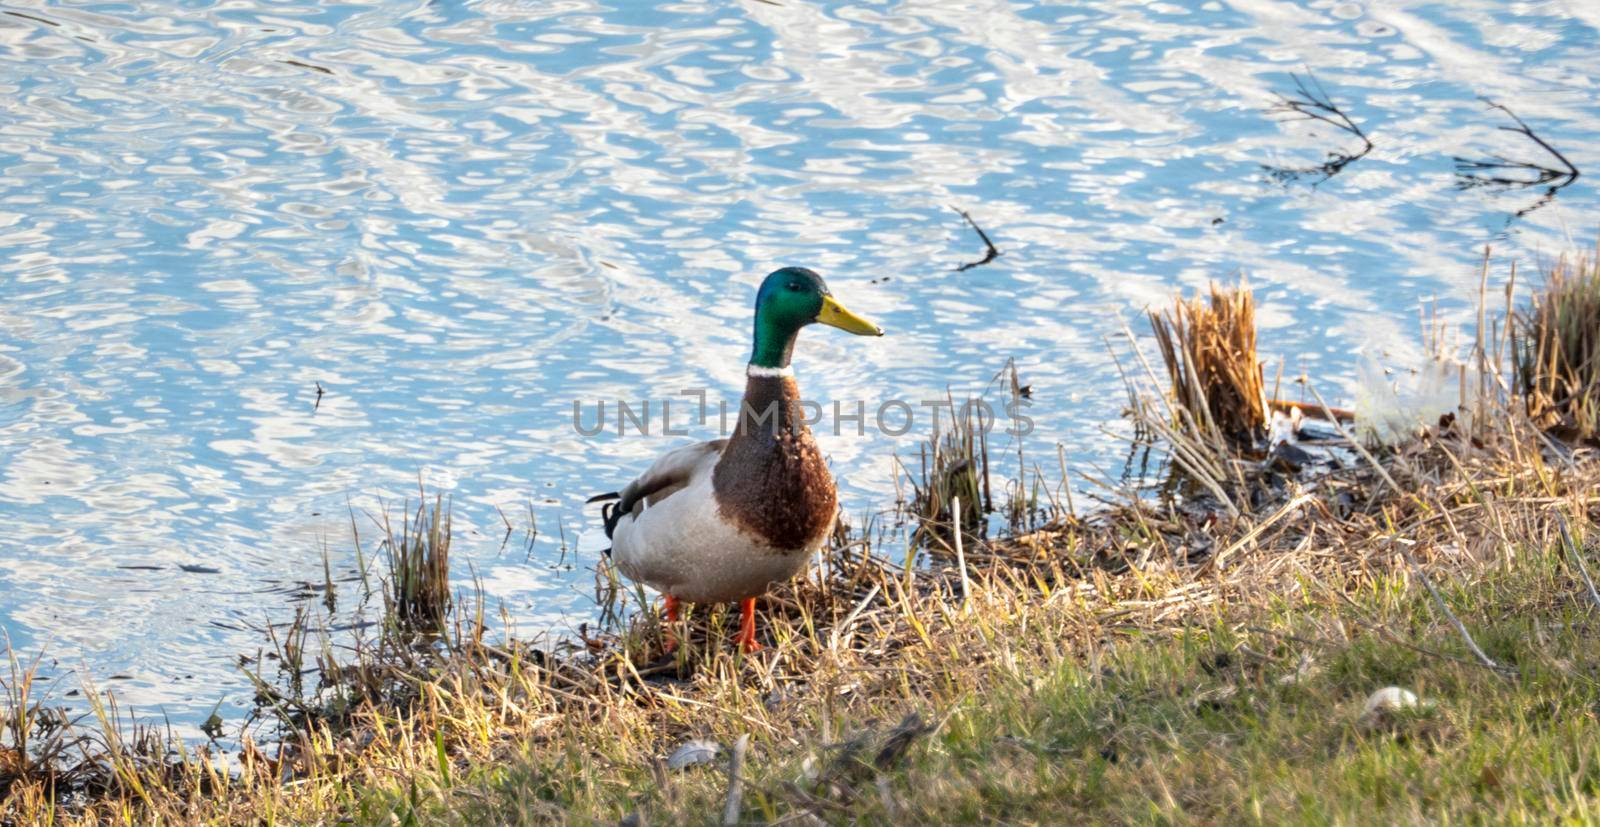 A duck for the winter. They're sitting in the ice. Copy space for text. Wild life of animals near people